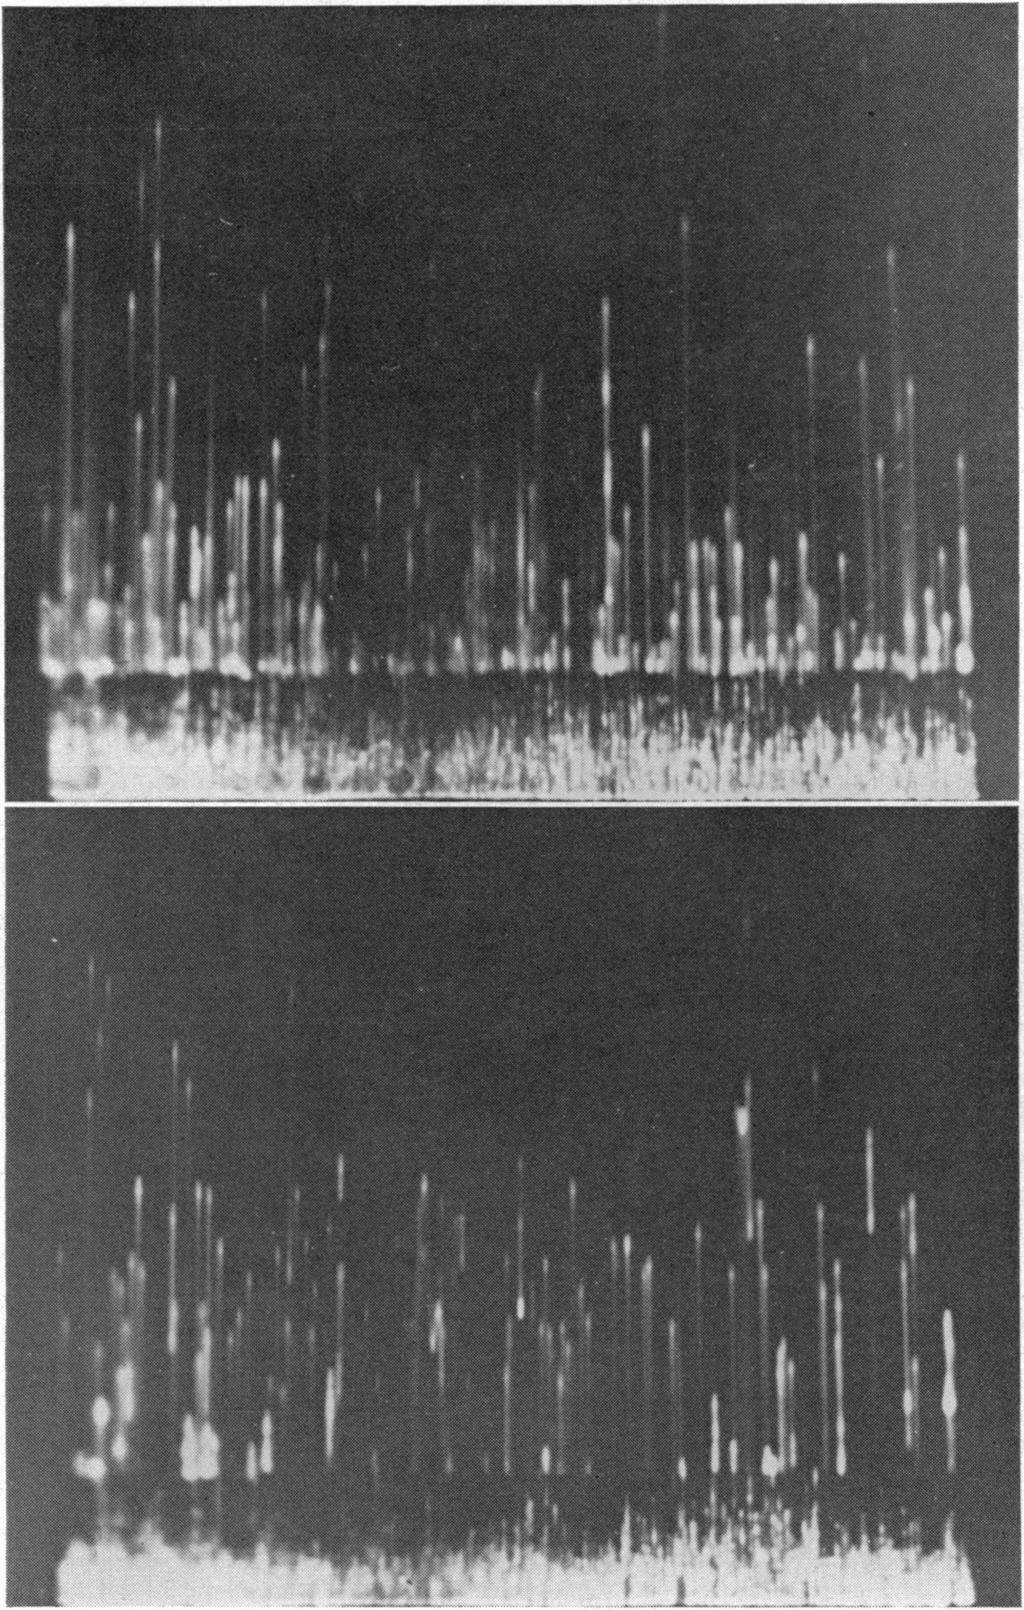 482 SWANTON, CURBY, AND LIND [VOL. 10 figures showing displayed pulses from inert particles and representative microorganisms. Table 1 shows results from counts of inert latex beads.